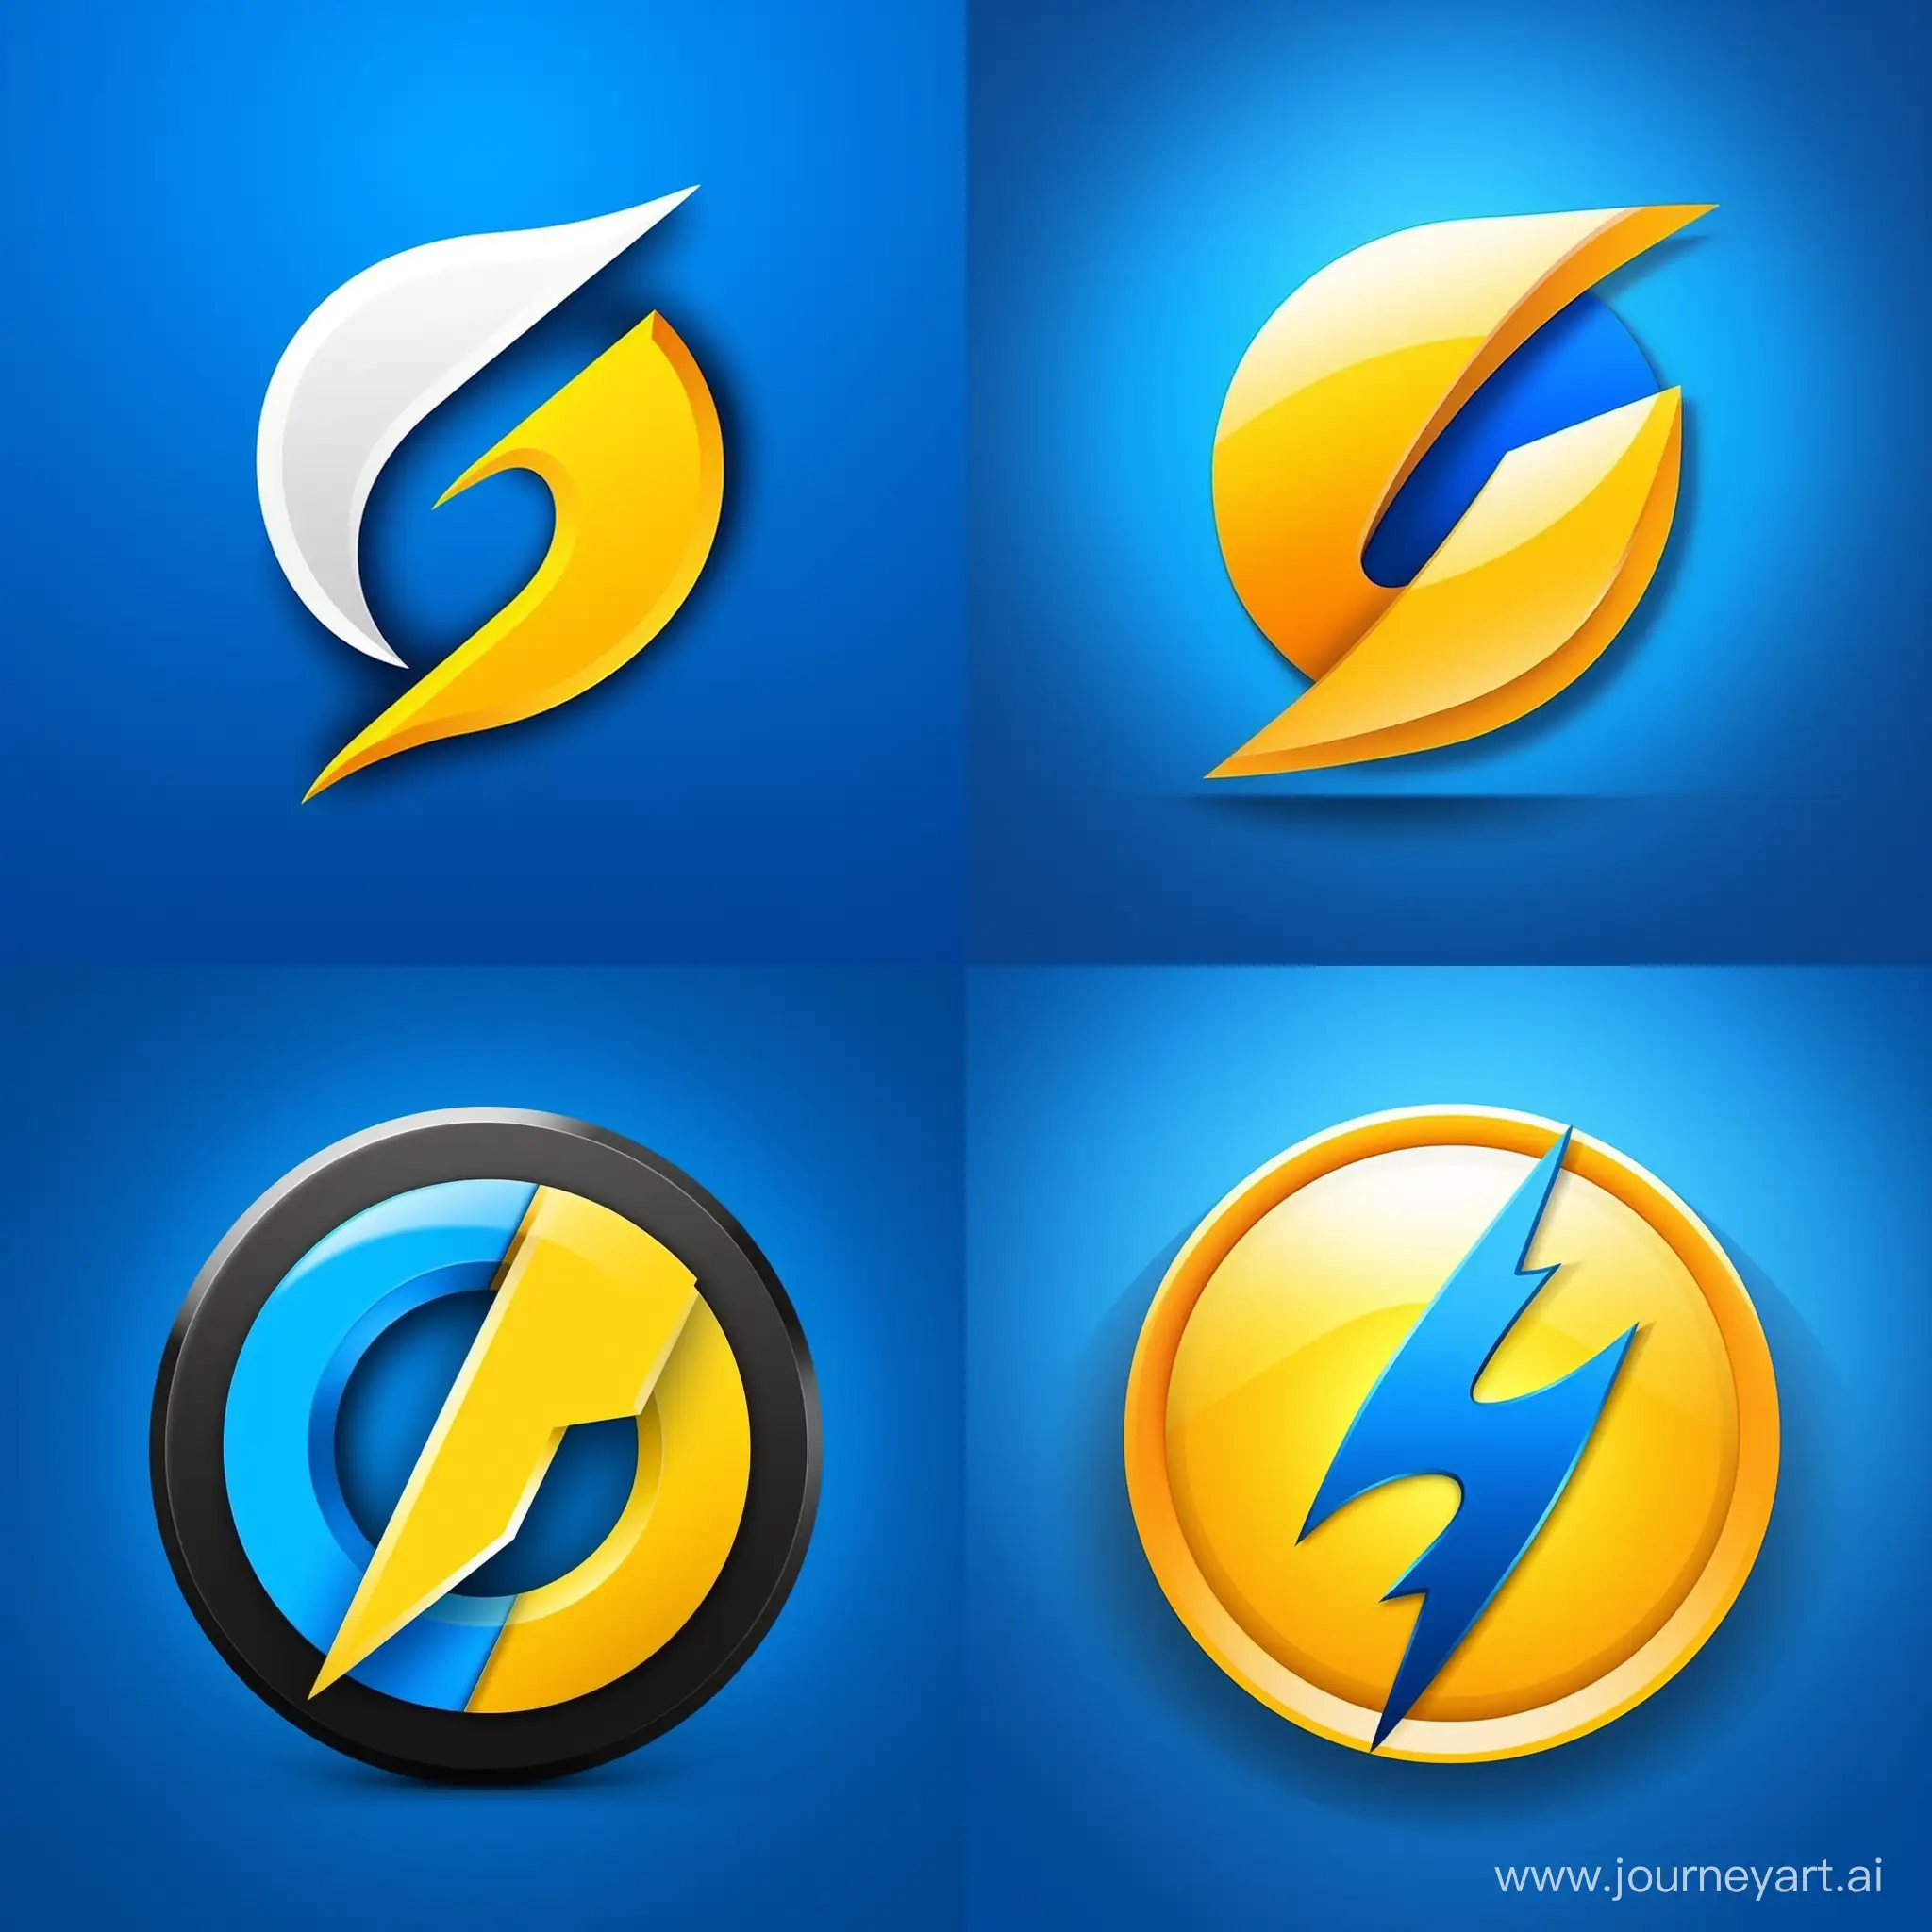 Create a flat vector, illustrative-style abstract concept logo design for a battery-saving app named 'PowerPro'. Incorporate the shapes of a lightning bolt and a battery icon merging together to represent the app's ability to optimize power usage. Use bold blue and electric yellow colors to invoke a sense of energy against a white background. Do not show any realistic photo detail shading.